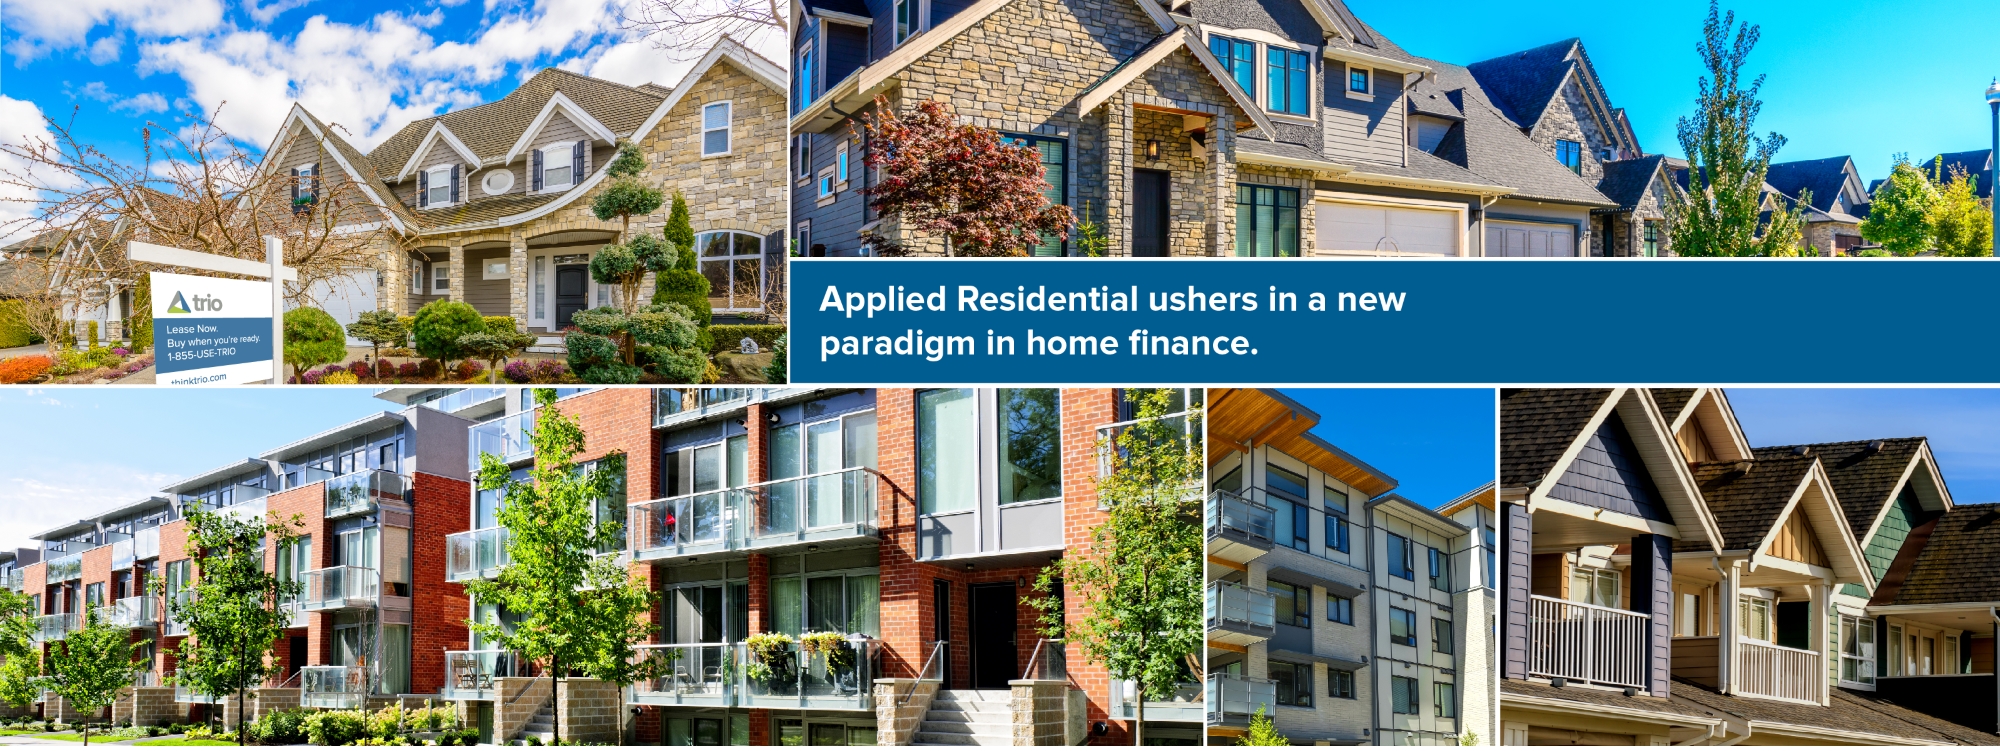 Applied Residential ushers in a new paradigm in home finance